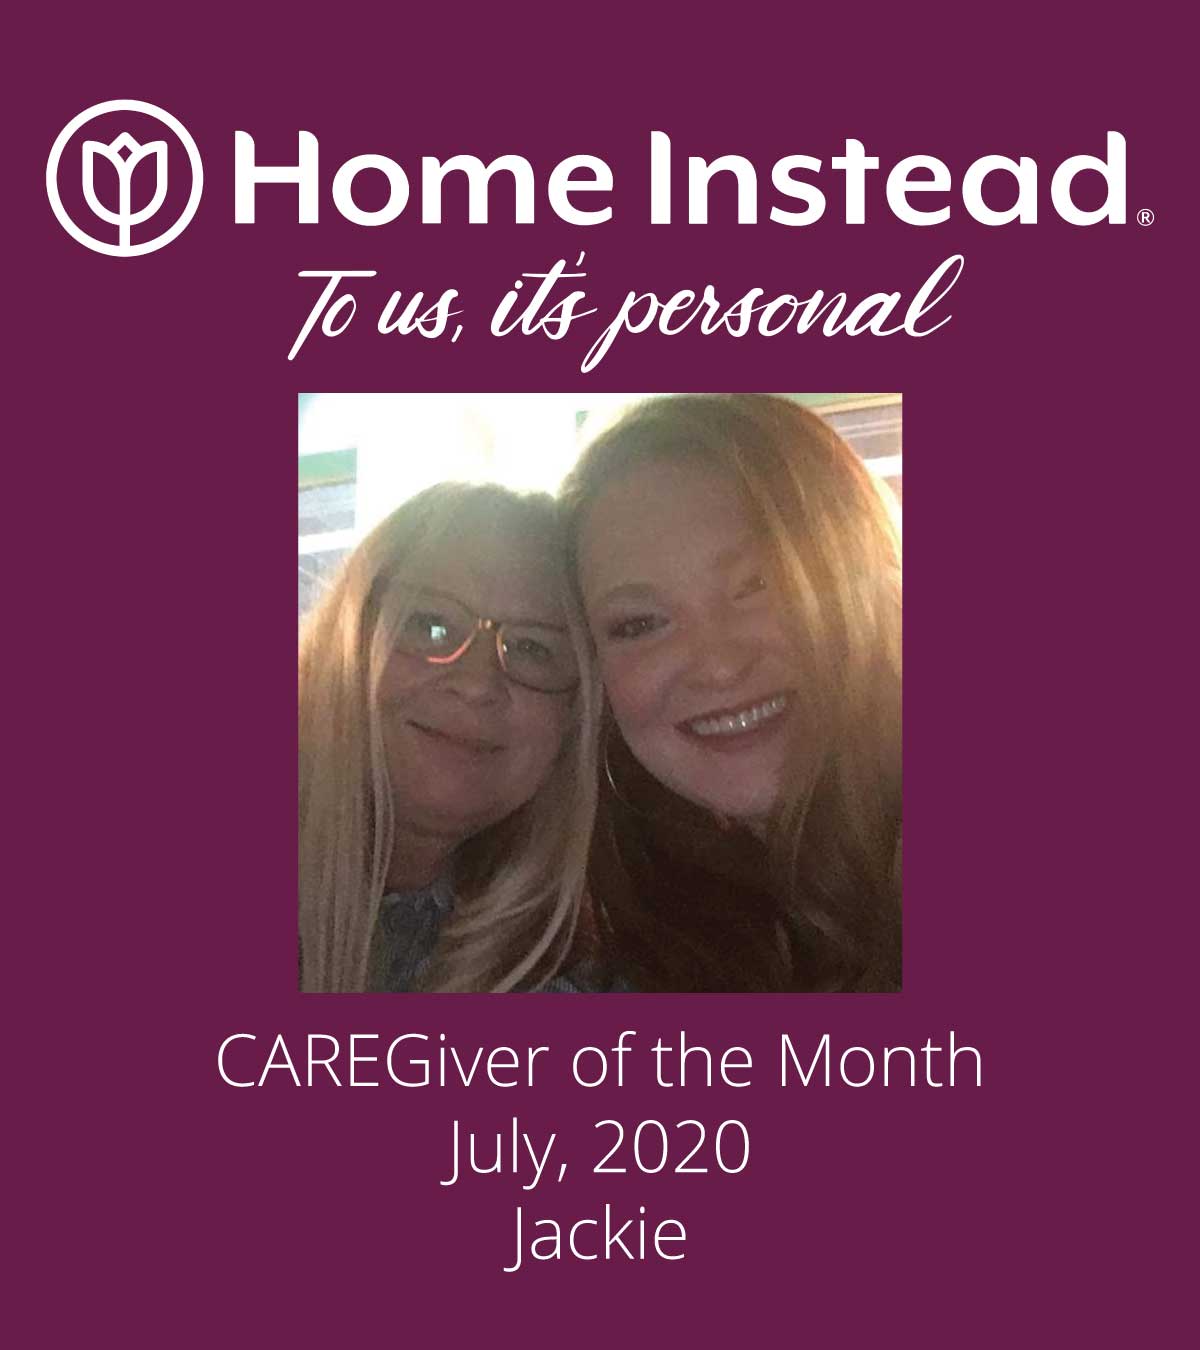 Home Instead Caregiver of the Month Jackie